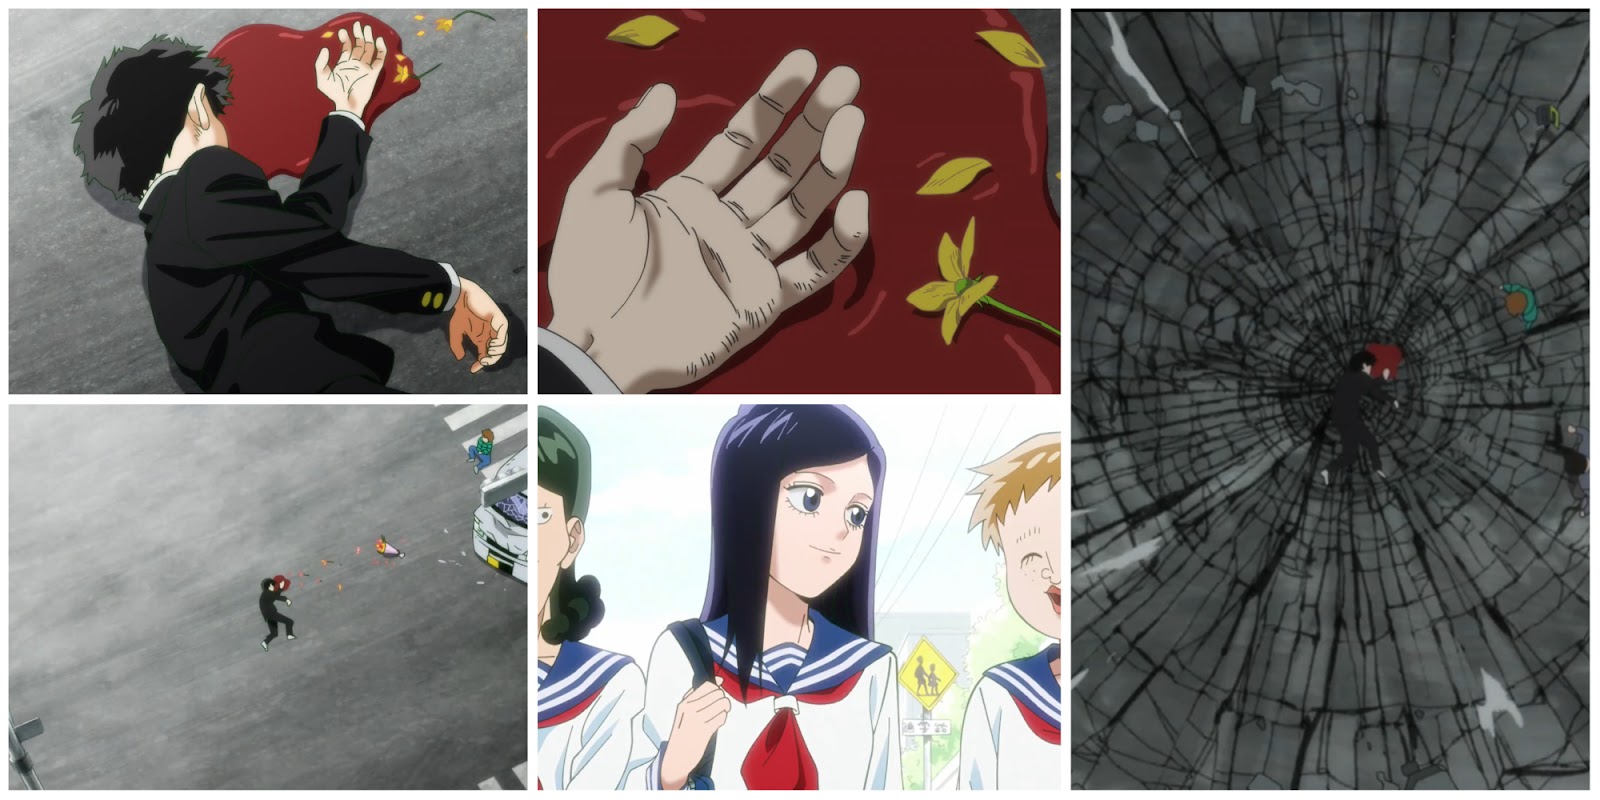 Mob Psycho 100 Season 3 Episode 10 (Review) The End Of Mob As We Know Him 